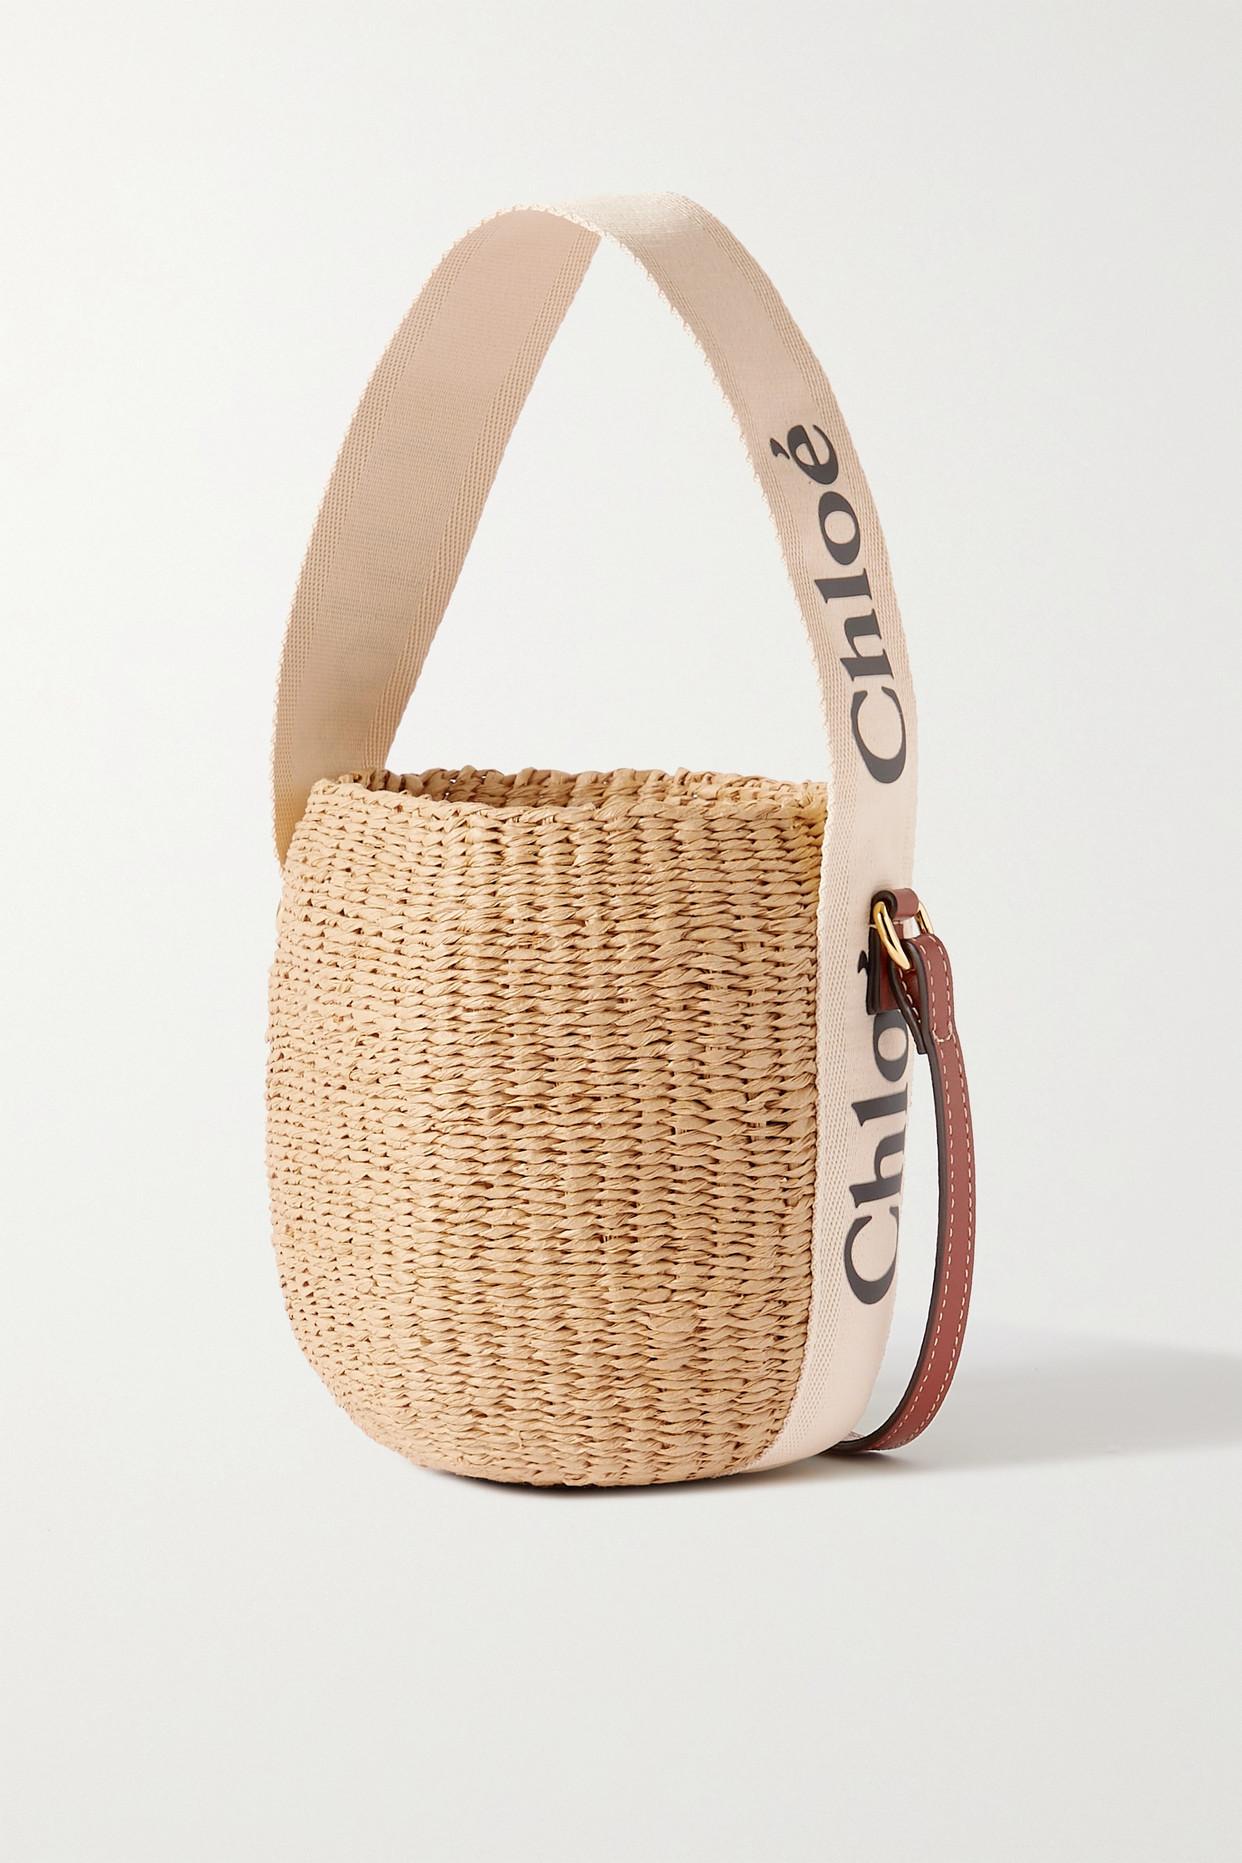 Chloé Woody Small Leather-trimmed Raffia Basket Bag in White | Lyst